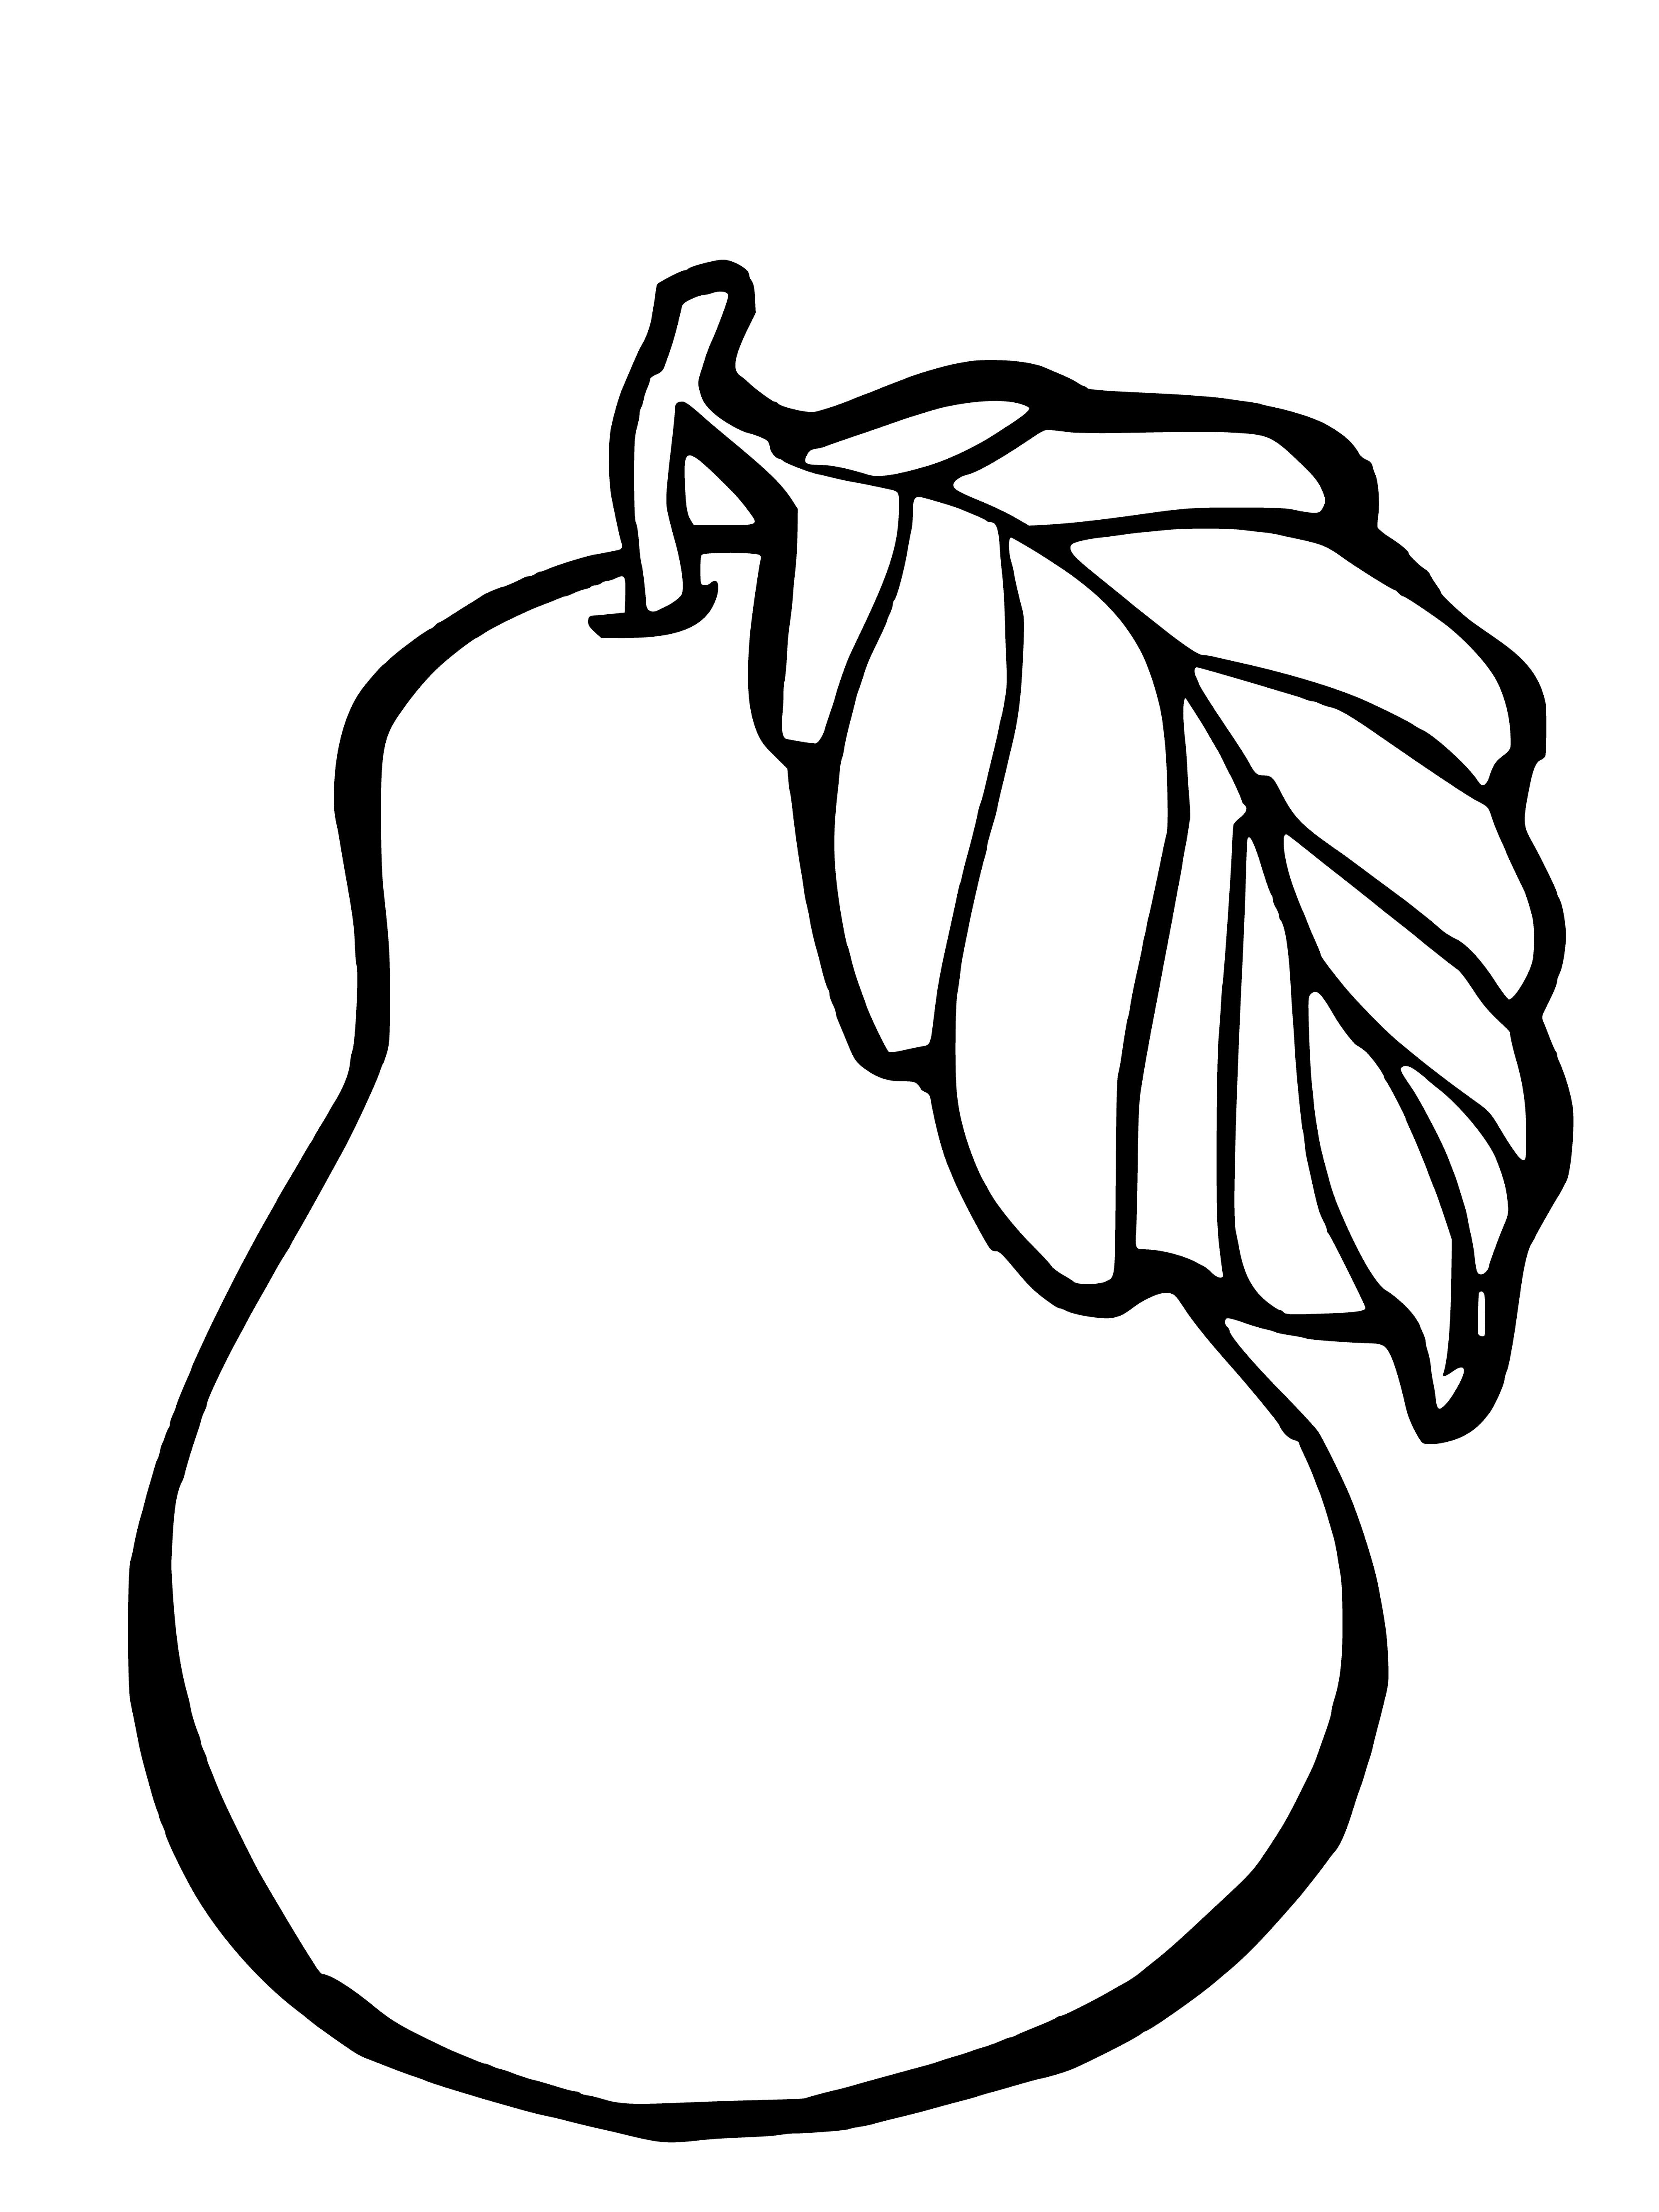 coloring page: A pear is a juicy, mildly sweet fruit with green, yellow, or red skin. High in dietary fiber, vitamins C & K.